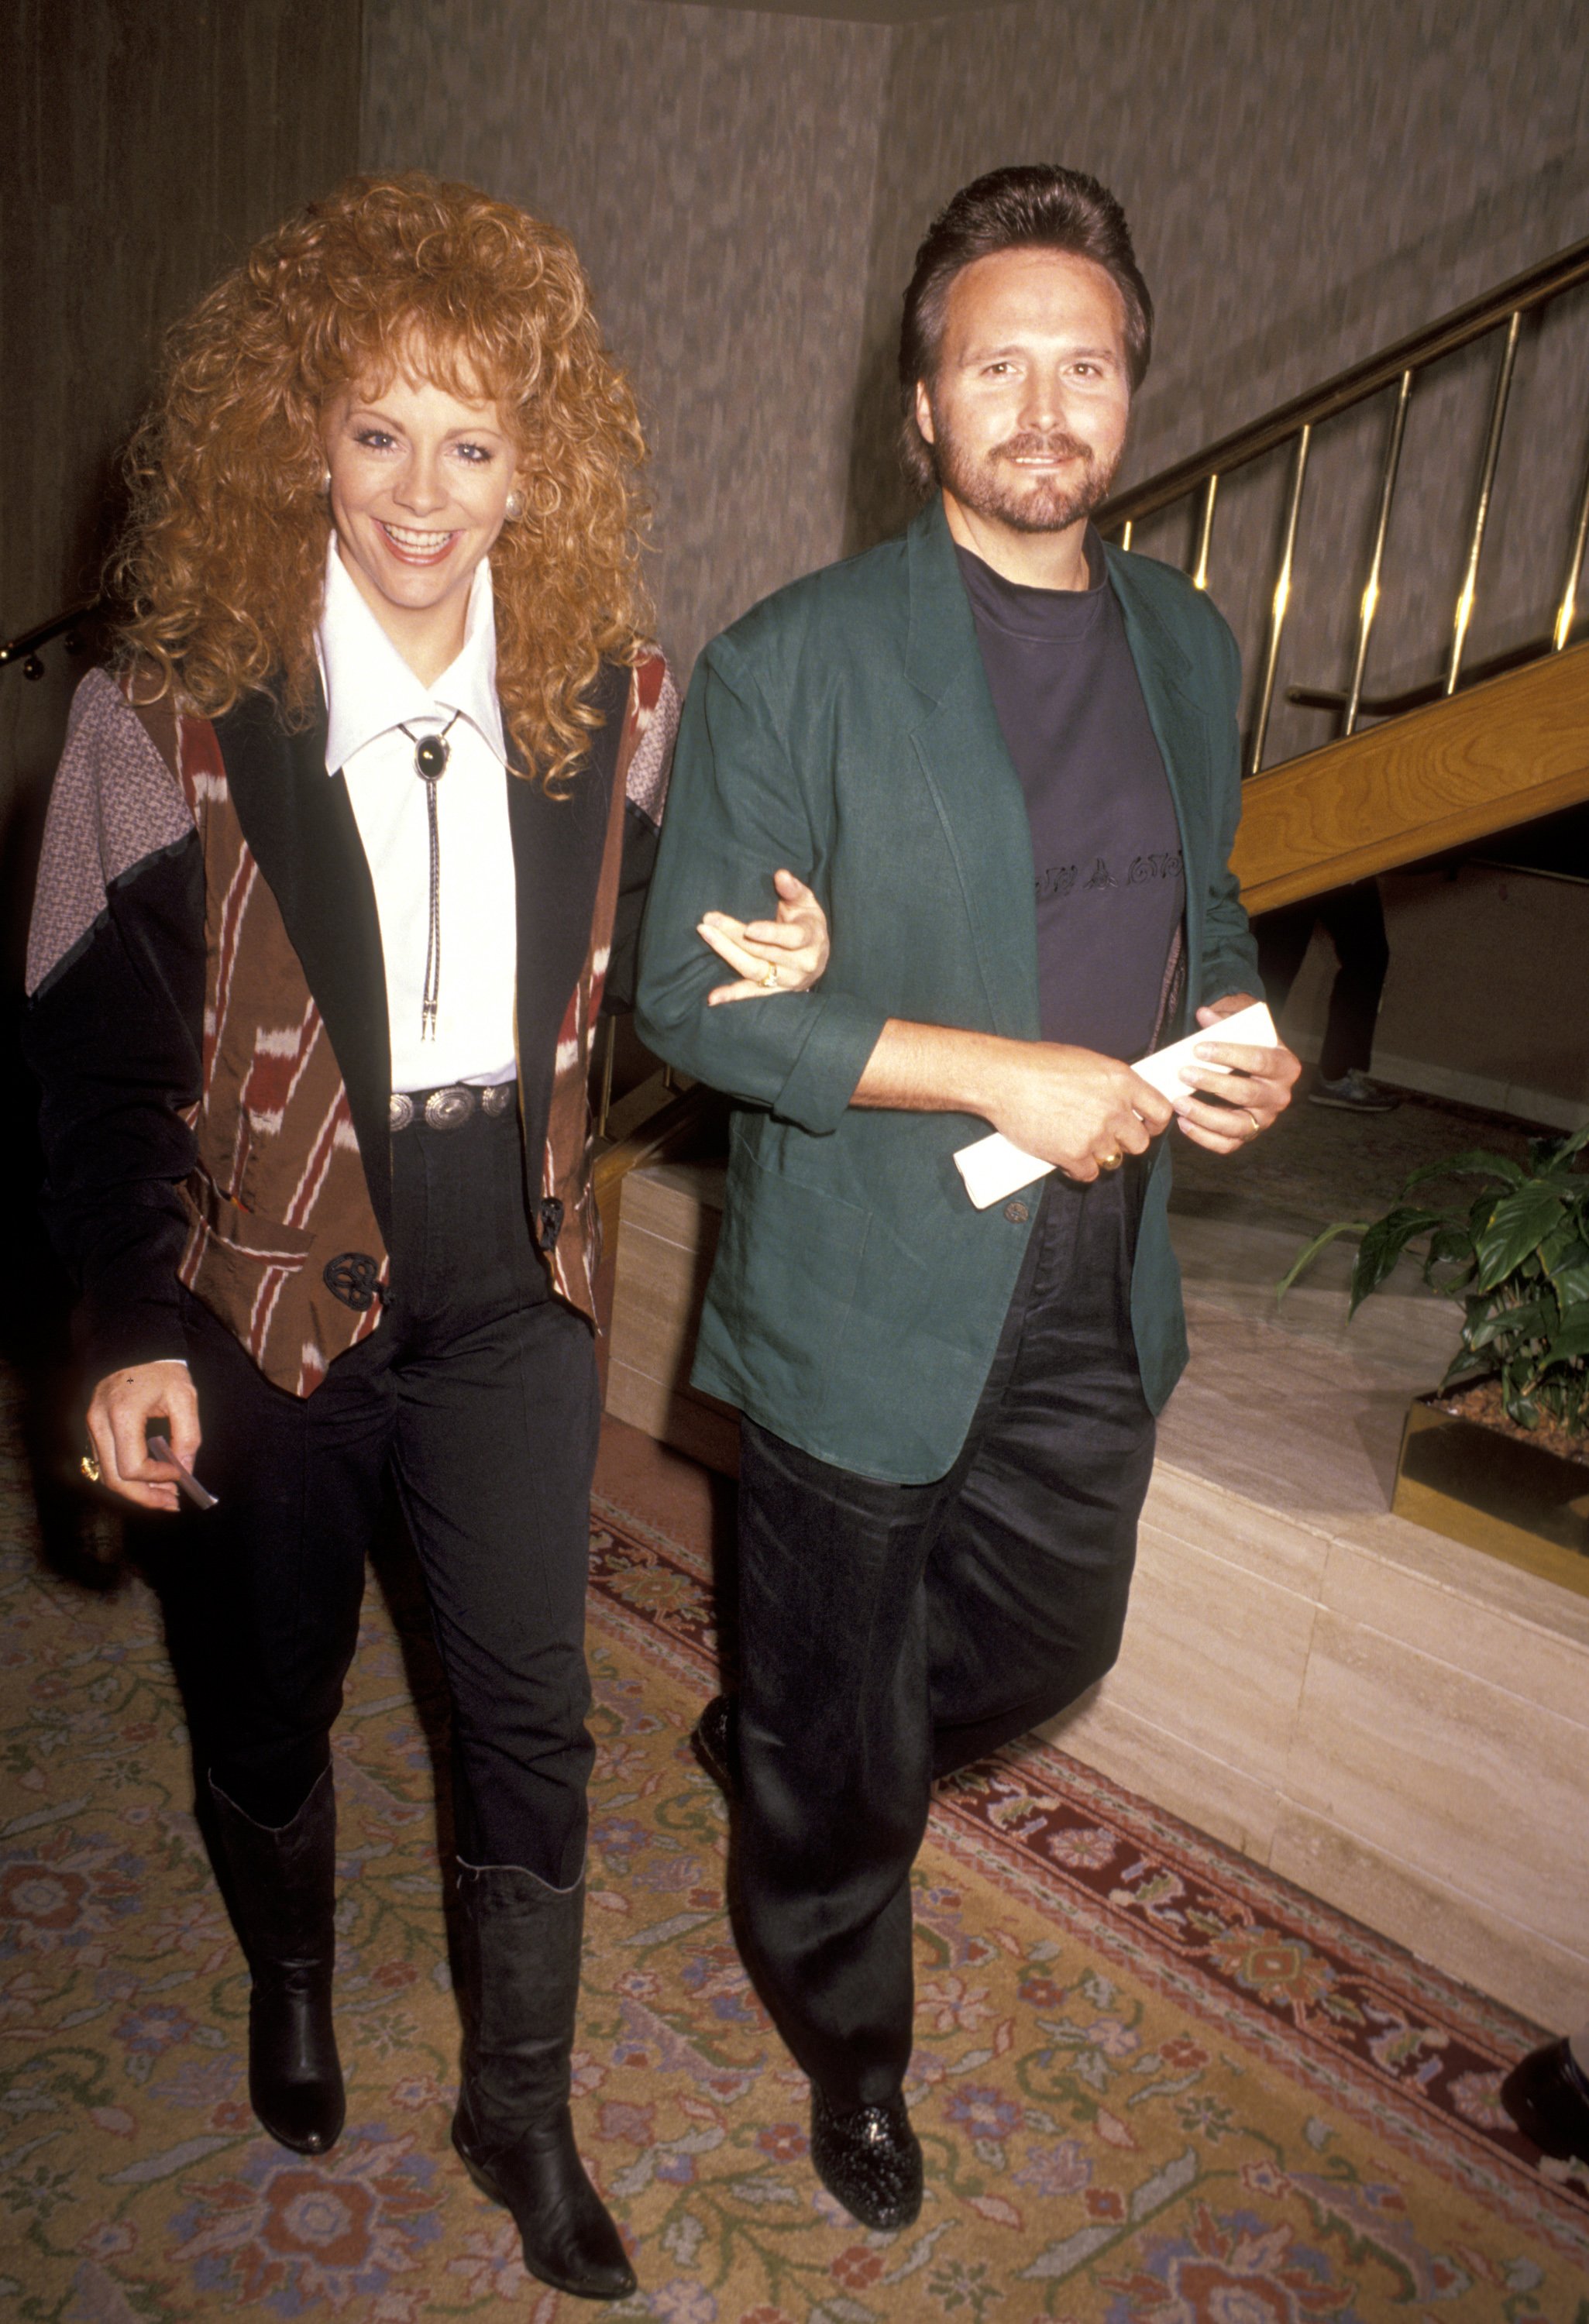 Reba McEntire and Narvel Blackstock at the NBC Fall TCA Press Tour on July 29, 1991 | Photo: Getty Images